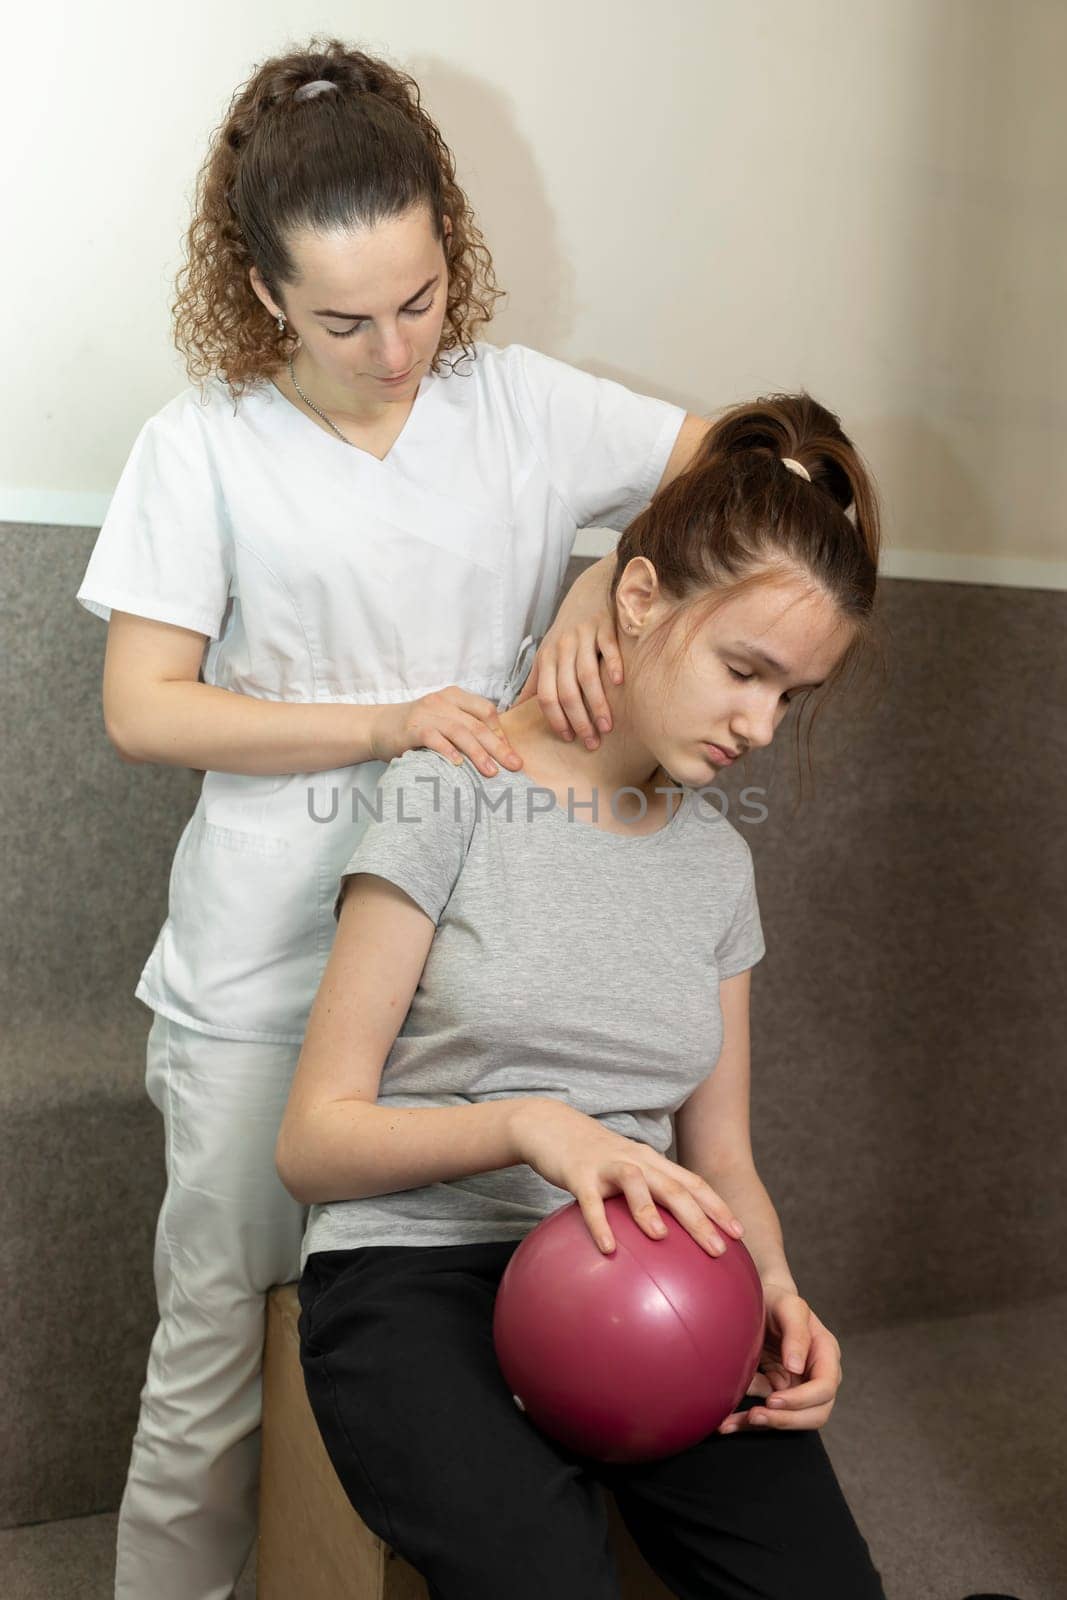 Physical Therapist Does Neck Massage To Child With Disability. Muscle Relaxation, Stretching After Physical Exercises With Ball. Health Support, Rehabilitation In Gym. Vertical plane by netatsi